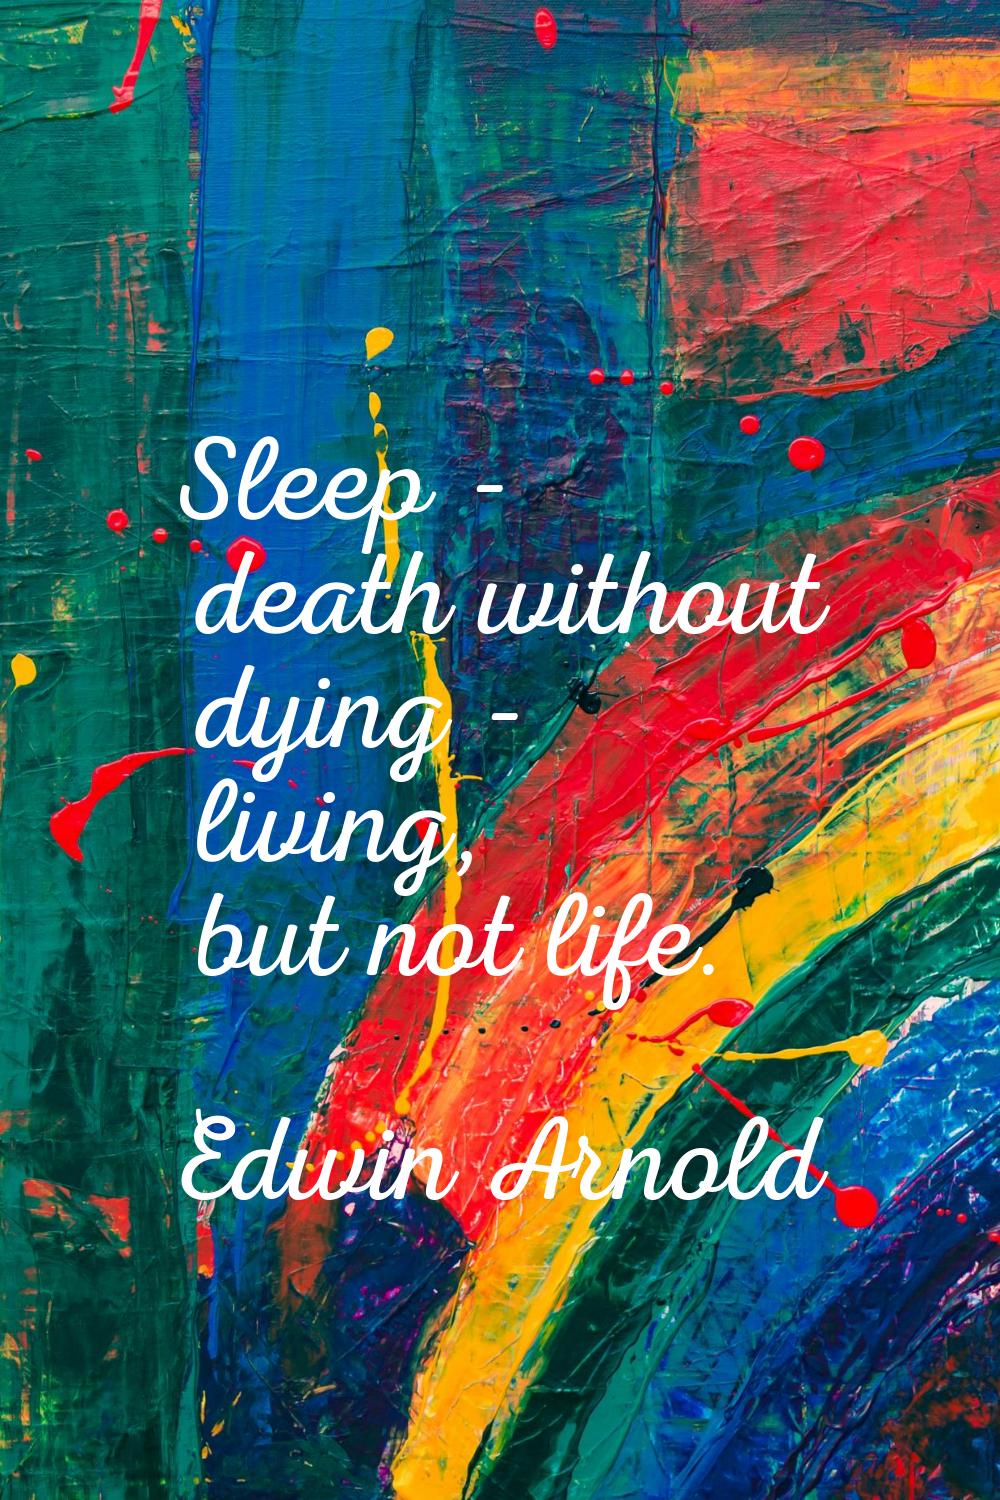 Sleep - death without dying - living, but not life.